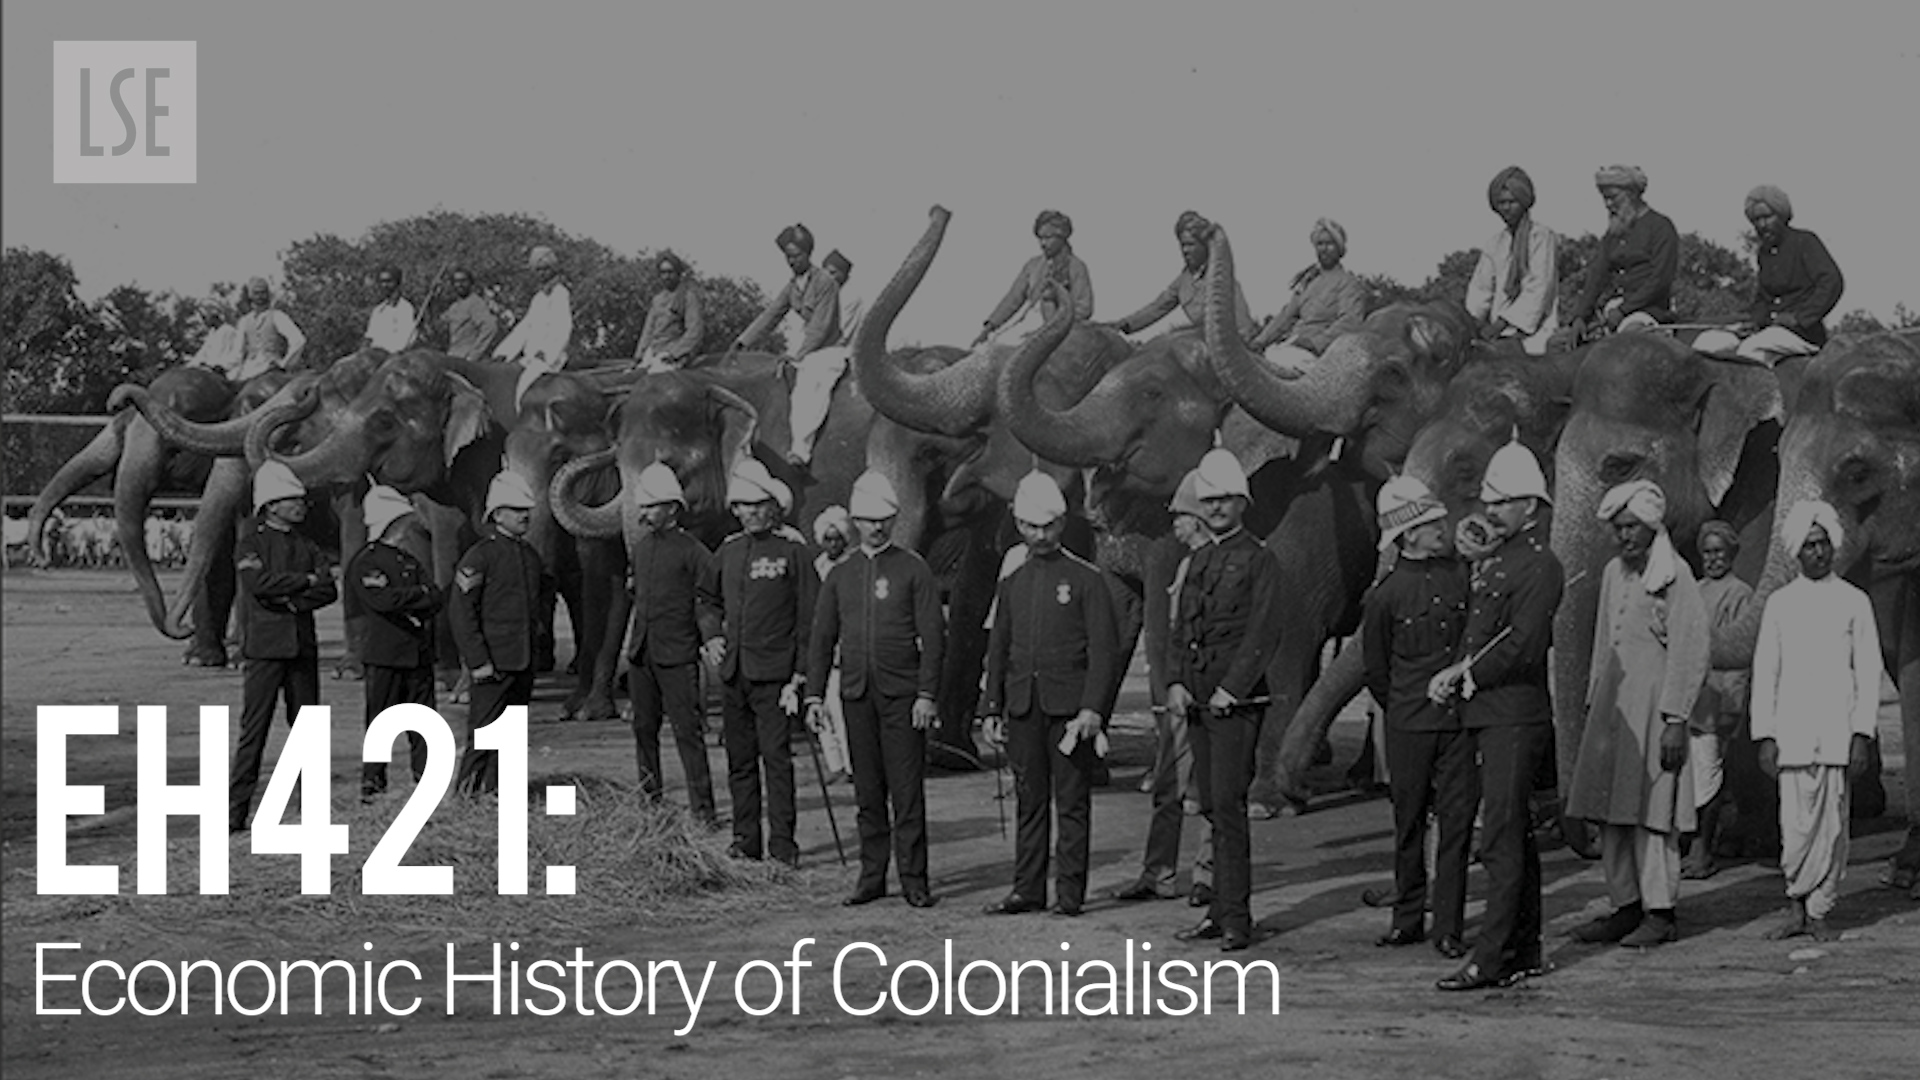 EH421 Economic History of Colonialism